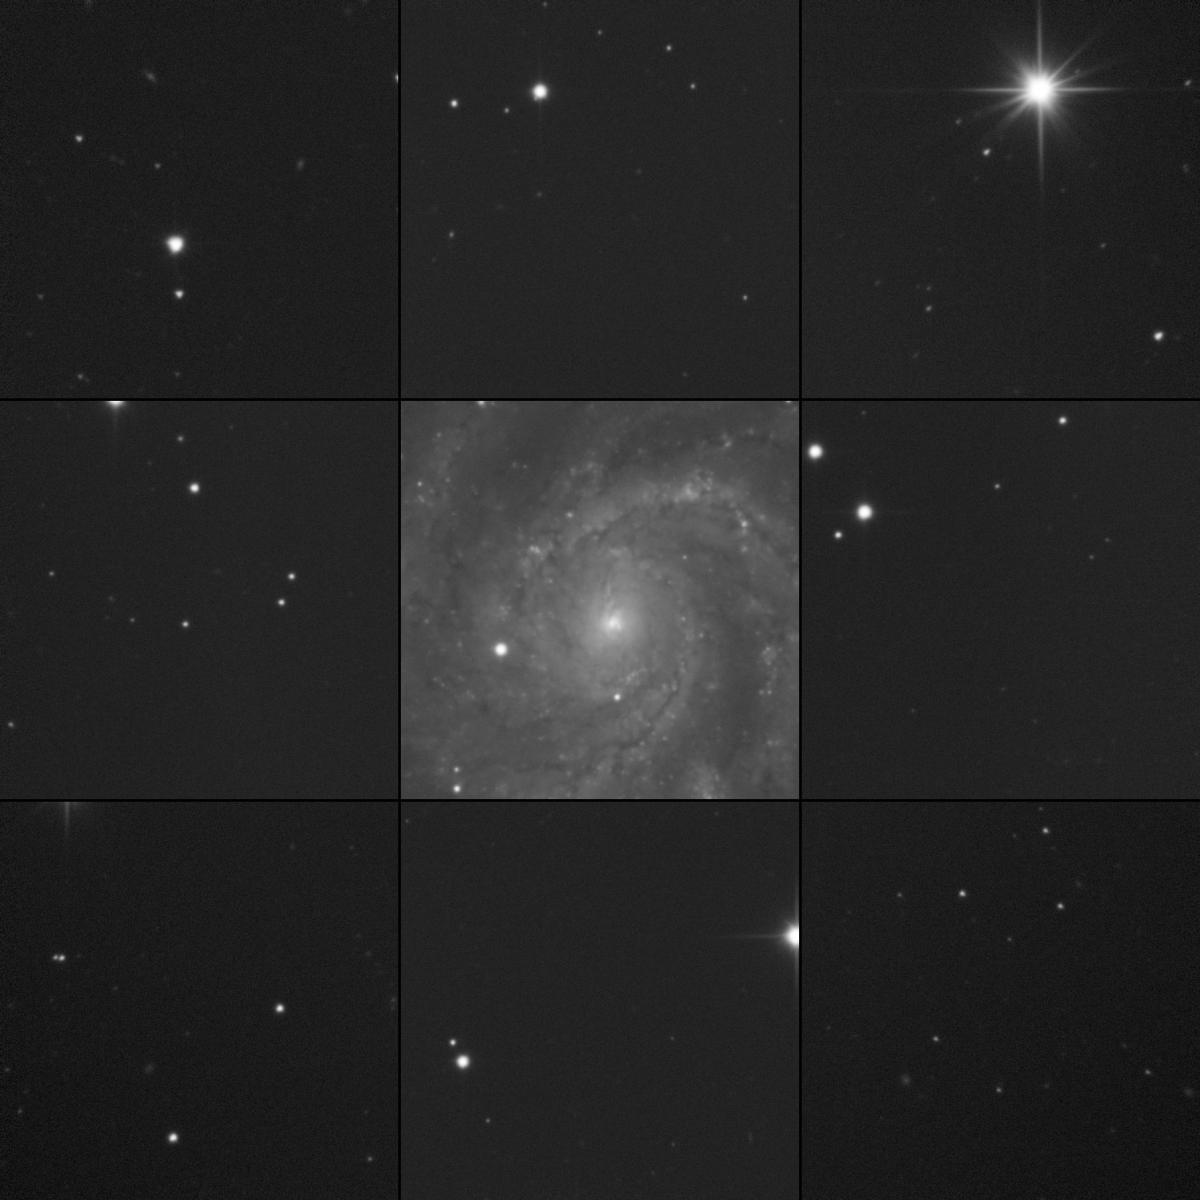 Planewave CDK14 vs DR350 - Experienced Deep Sky Imaging - Cloudy